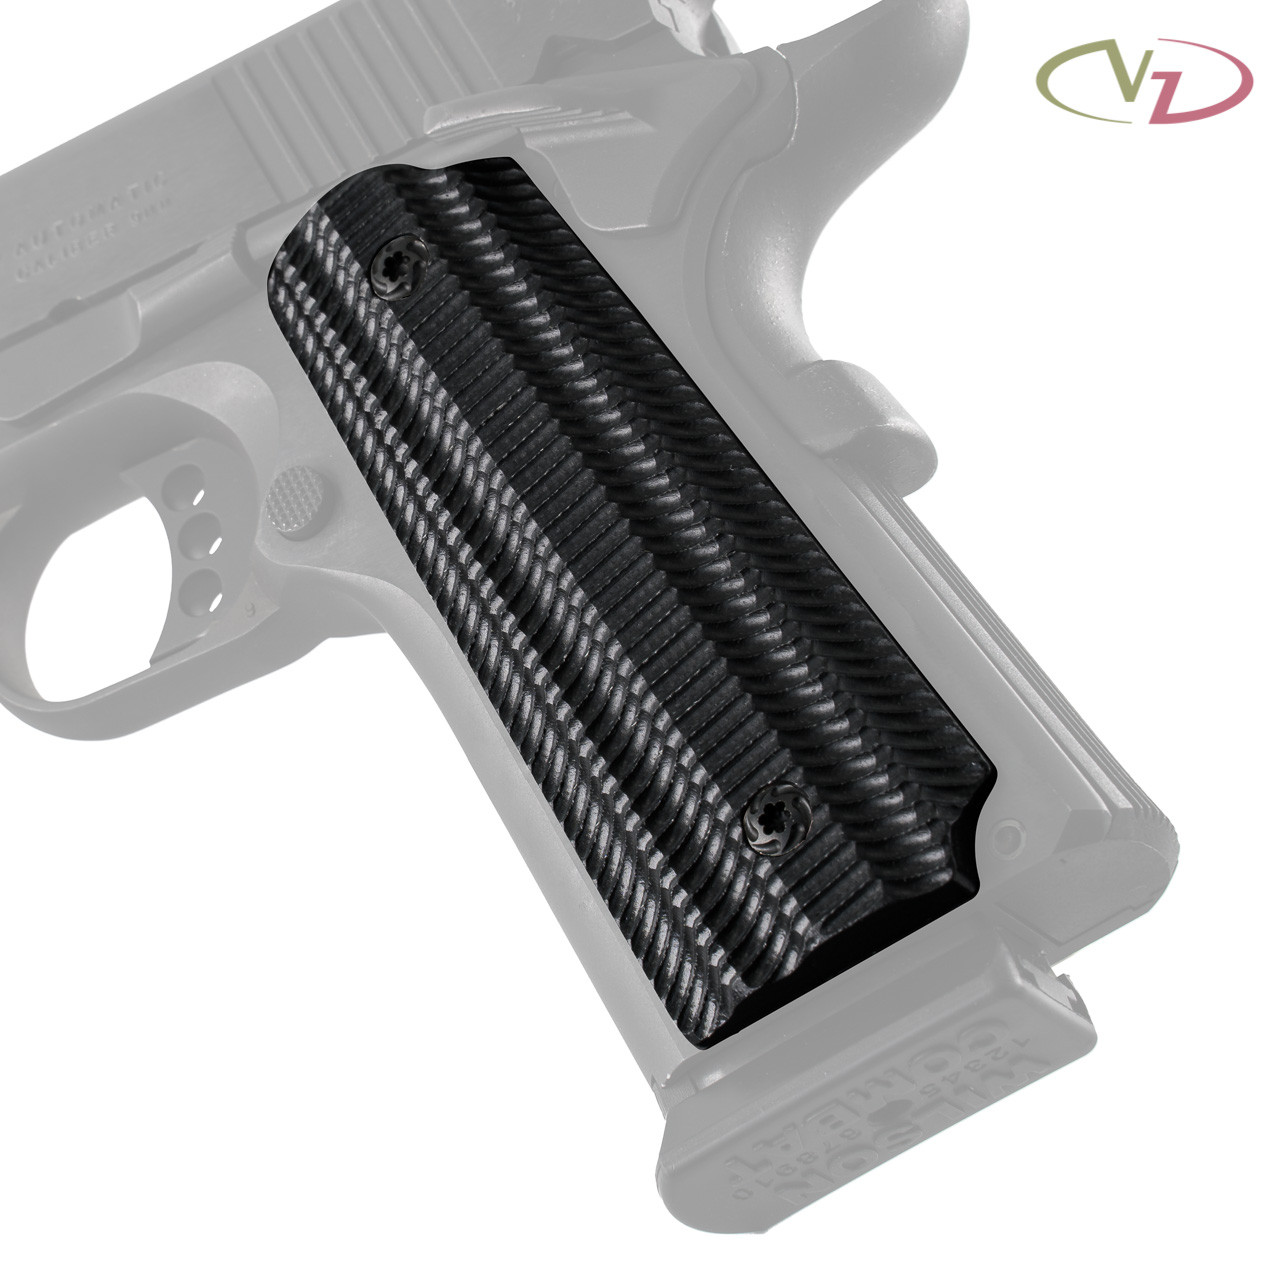 1911 Grips (Full Size) with Alien Texture | VZ Grips